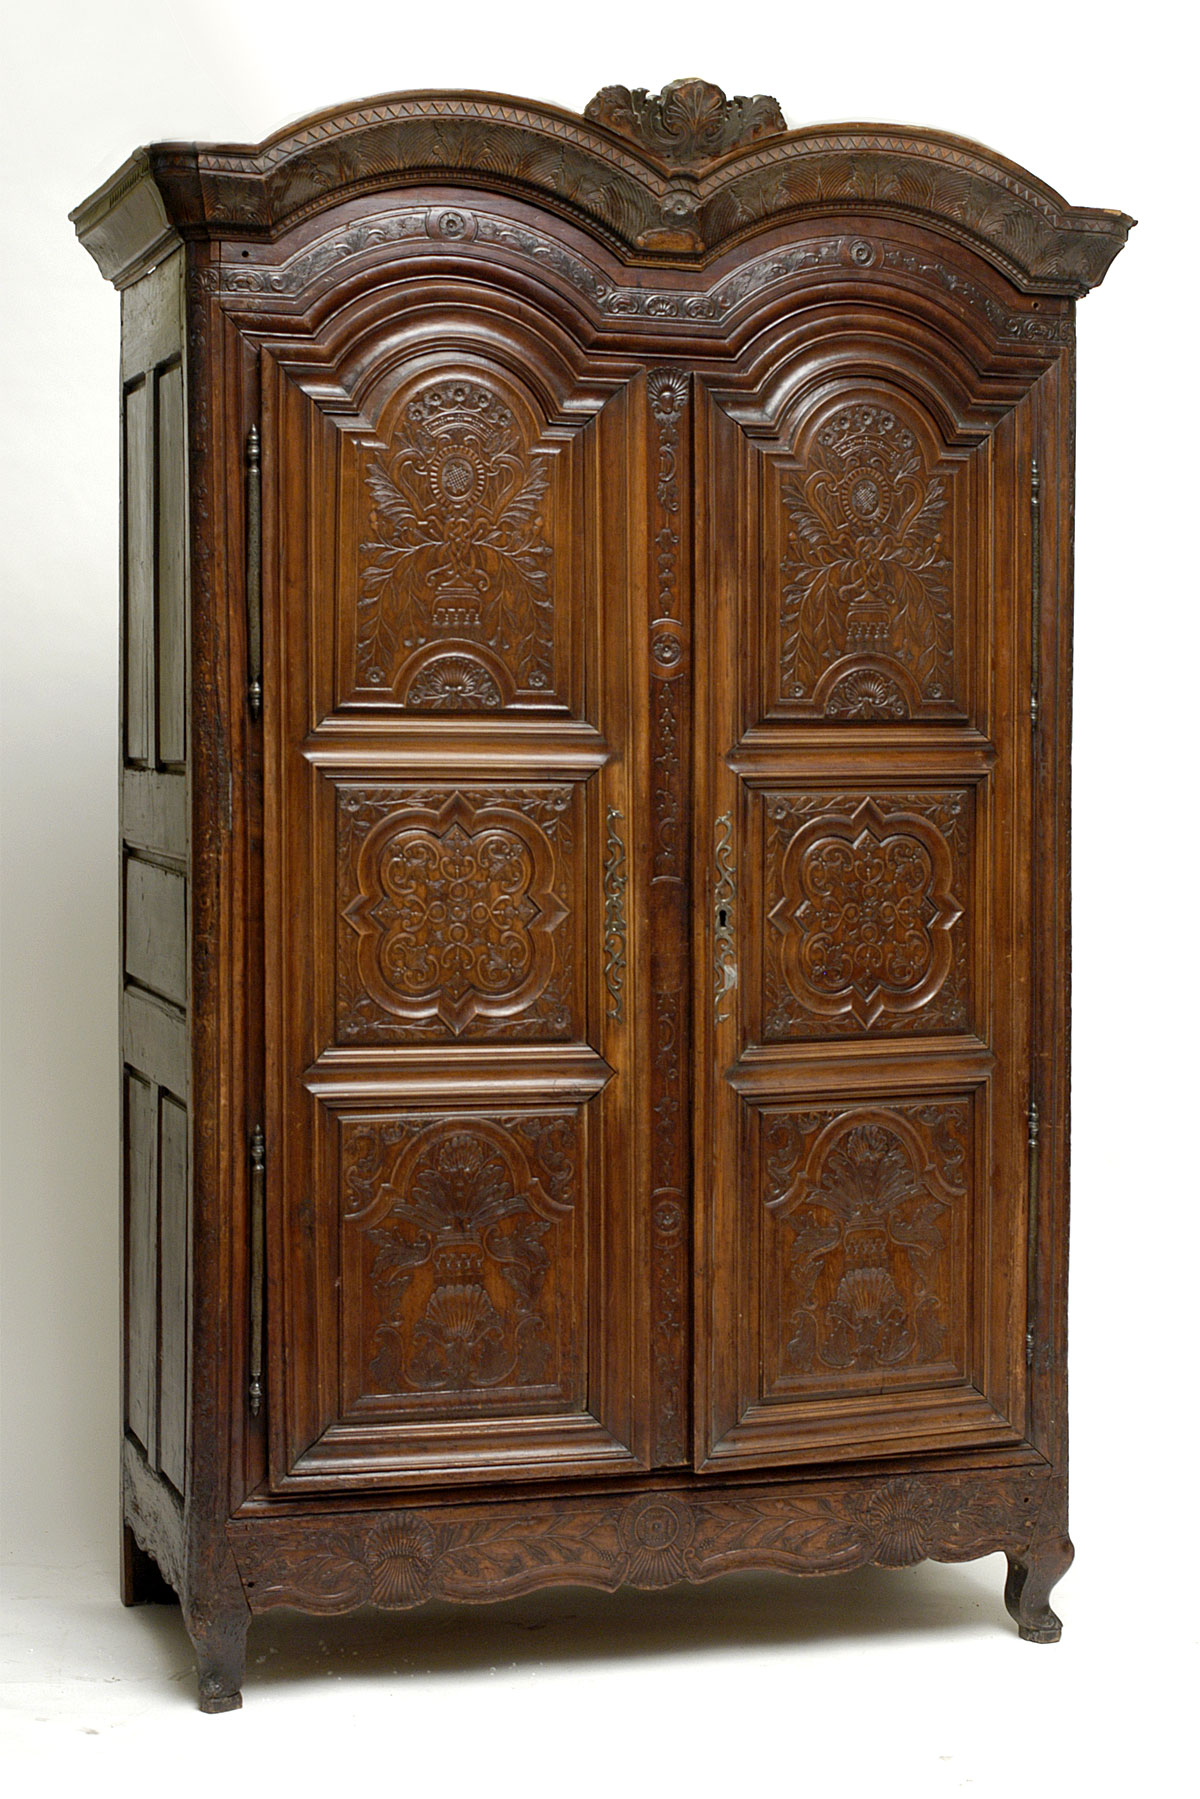 Very fine, French, Regence period armoire